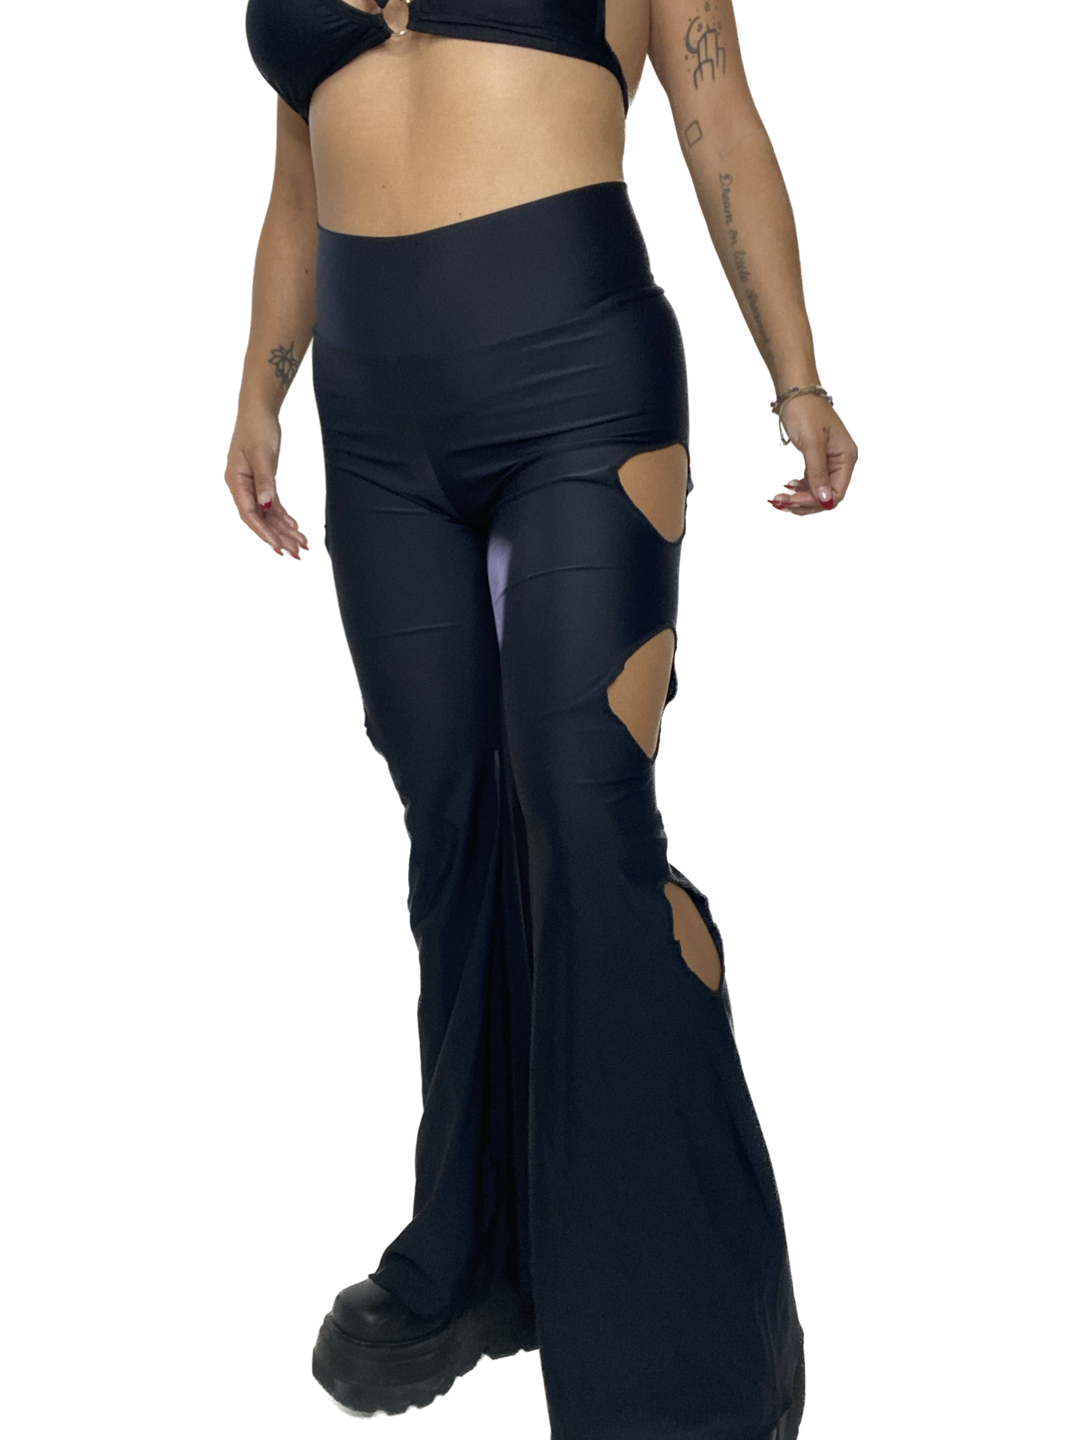 Black Cut Out Bell Bottoms BELL BOTTOMS Mi Gente Clothing   